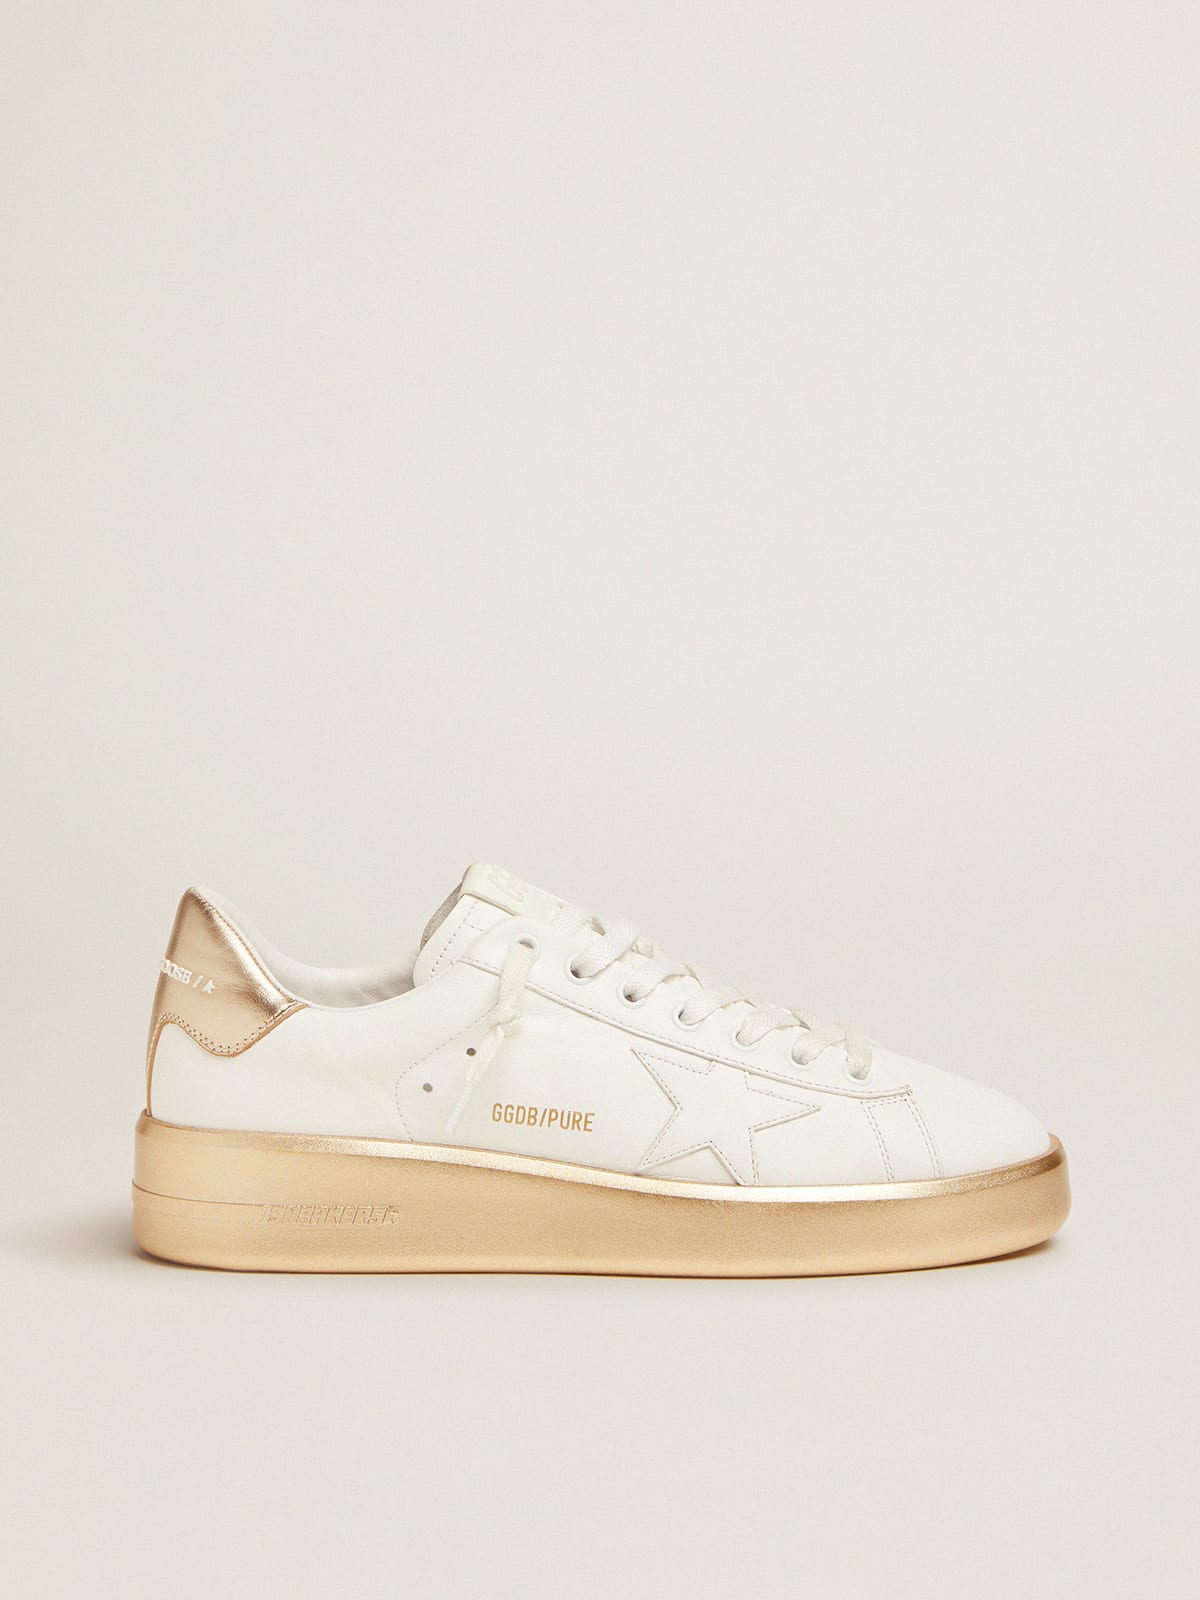 Purestar sneakers in leather with foxing and gold laminated leather ...